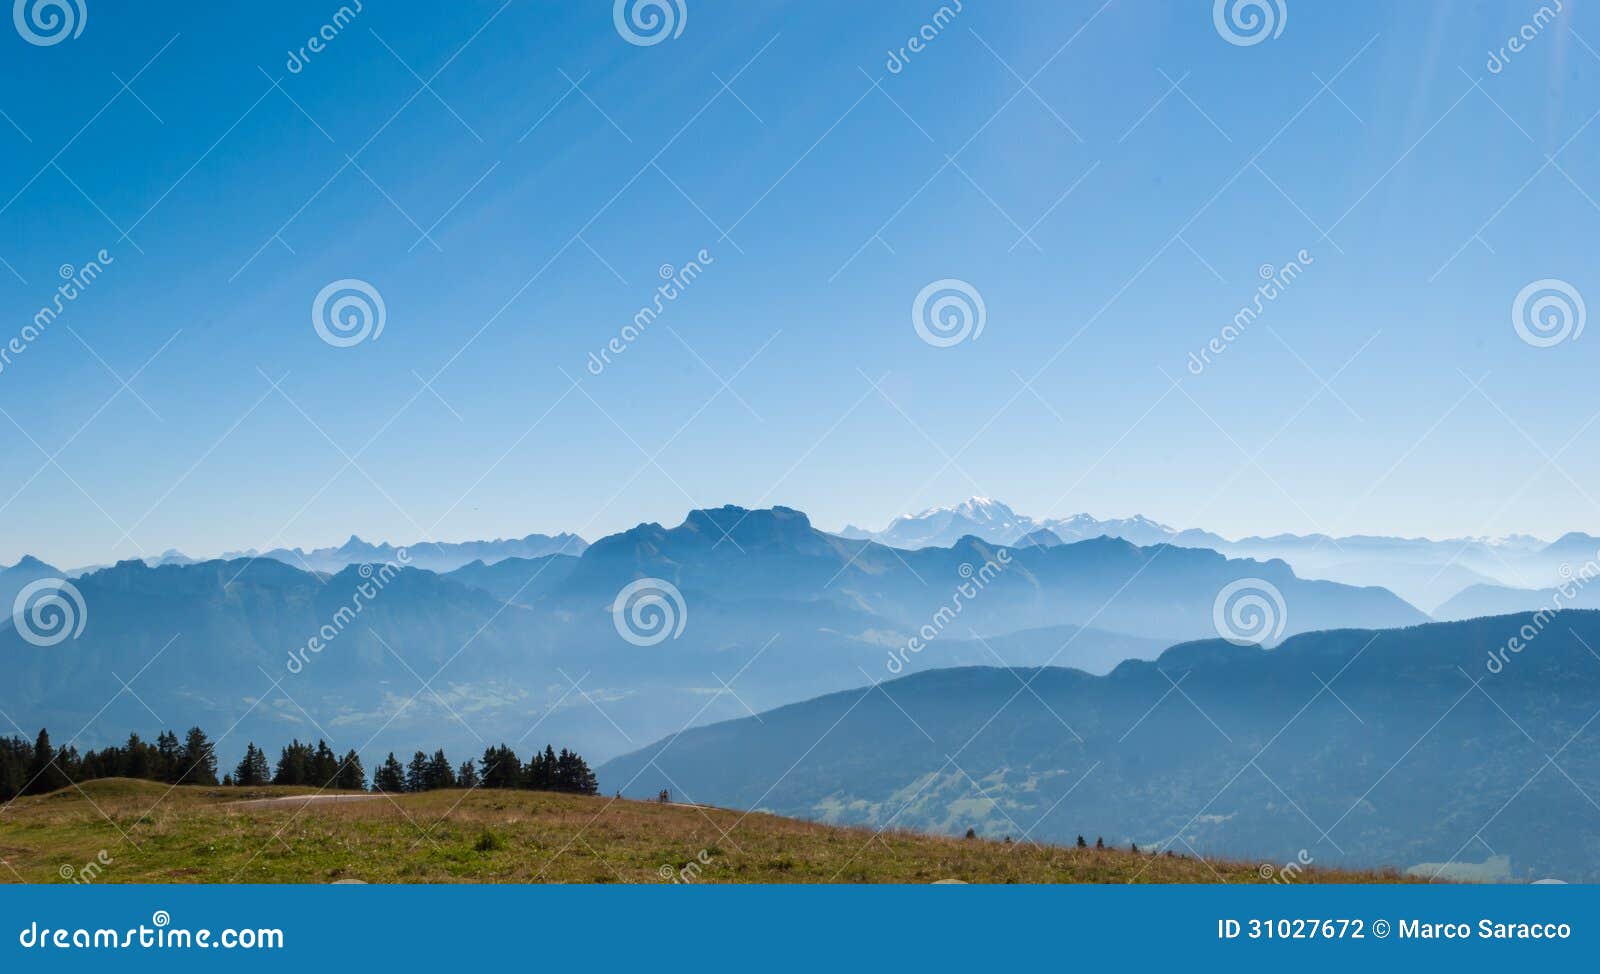 alps and mont blanc (monte bianco)